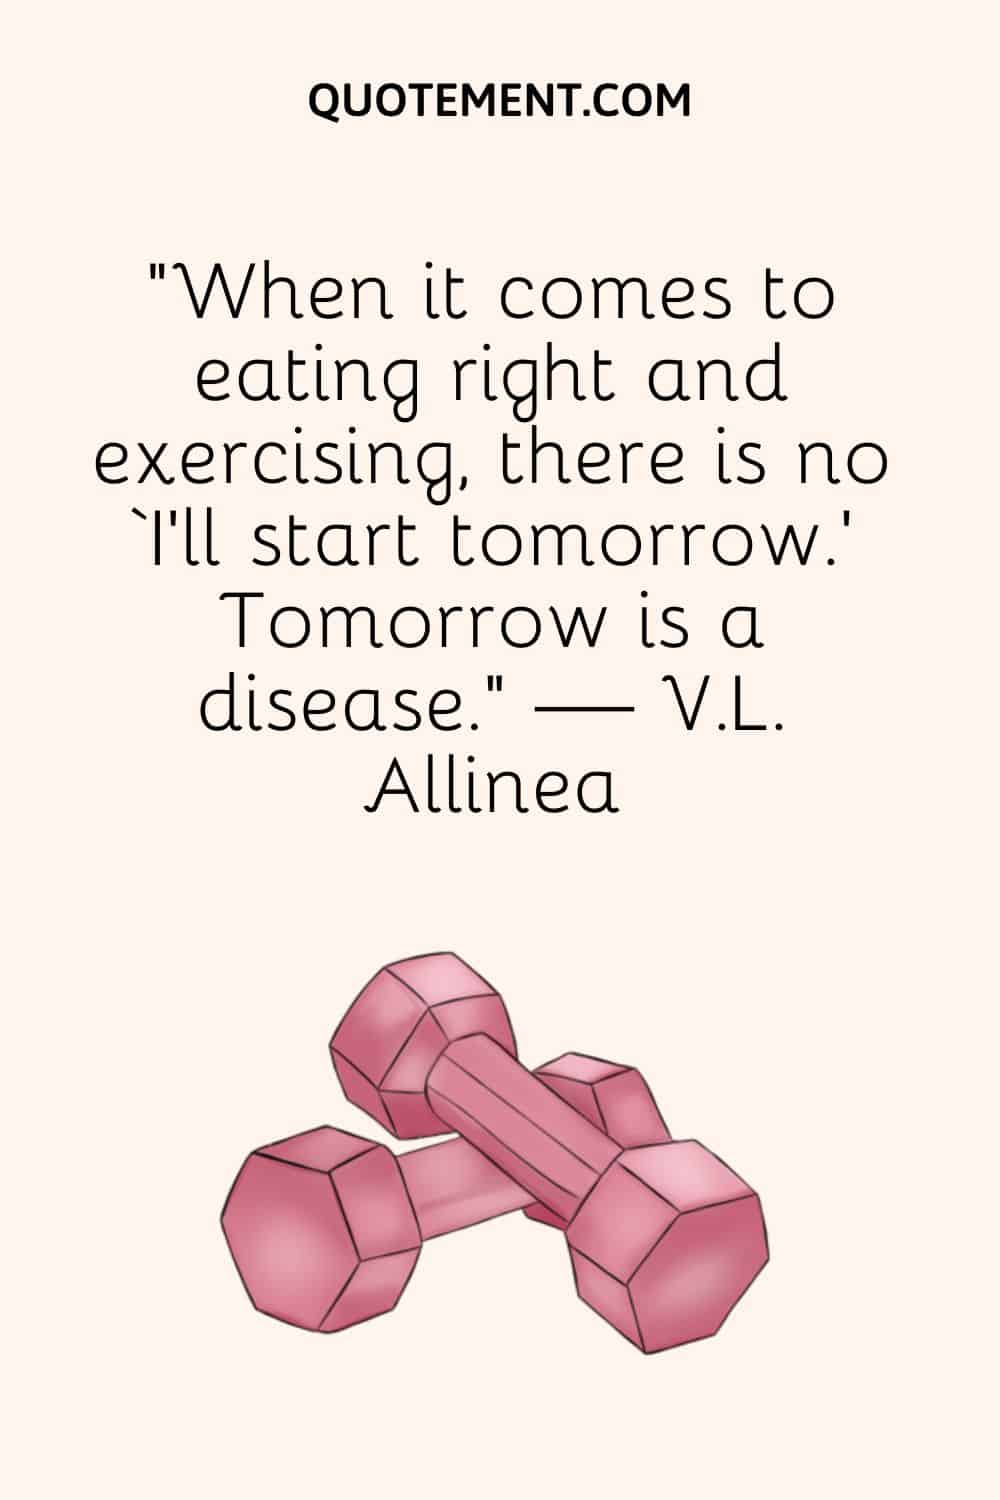 “When it comes to eating right and exercising, there is no ‘I’ll start tomorrow.’ Tomorrow is a disease.” — V.L. Allinea